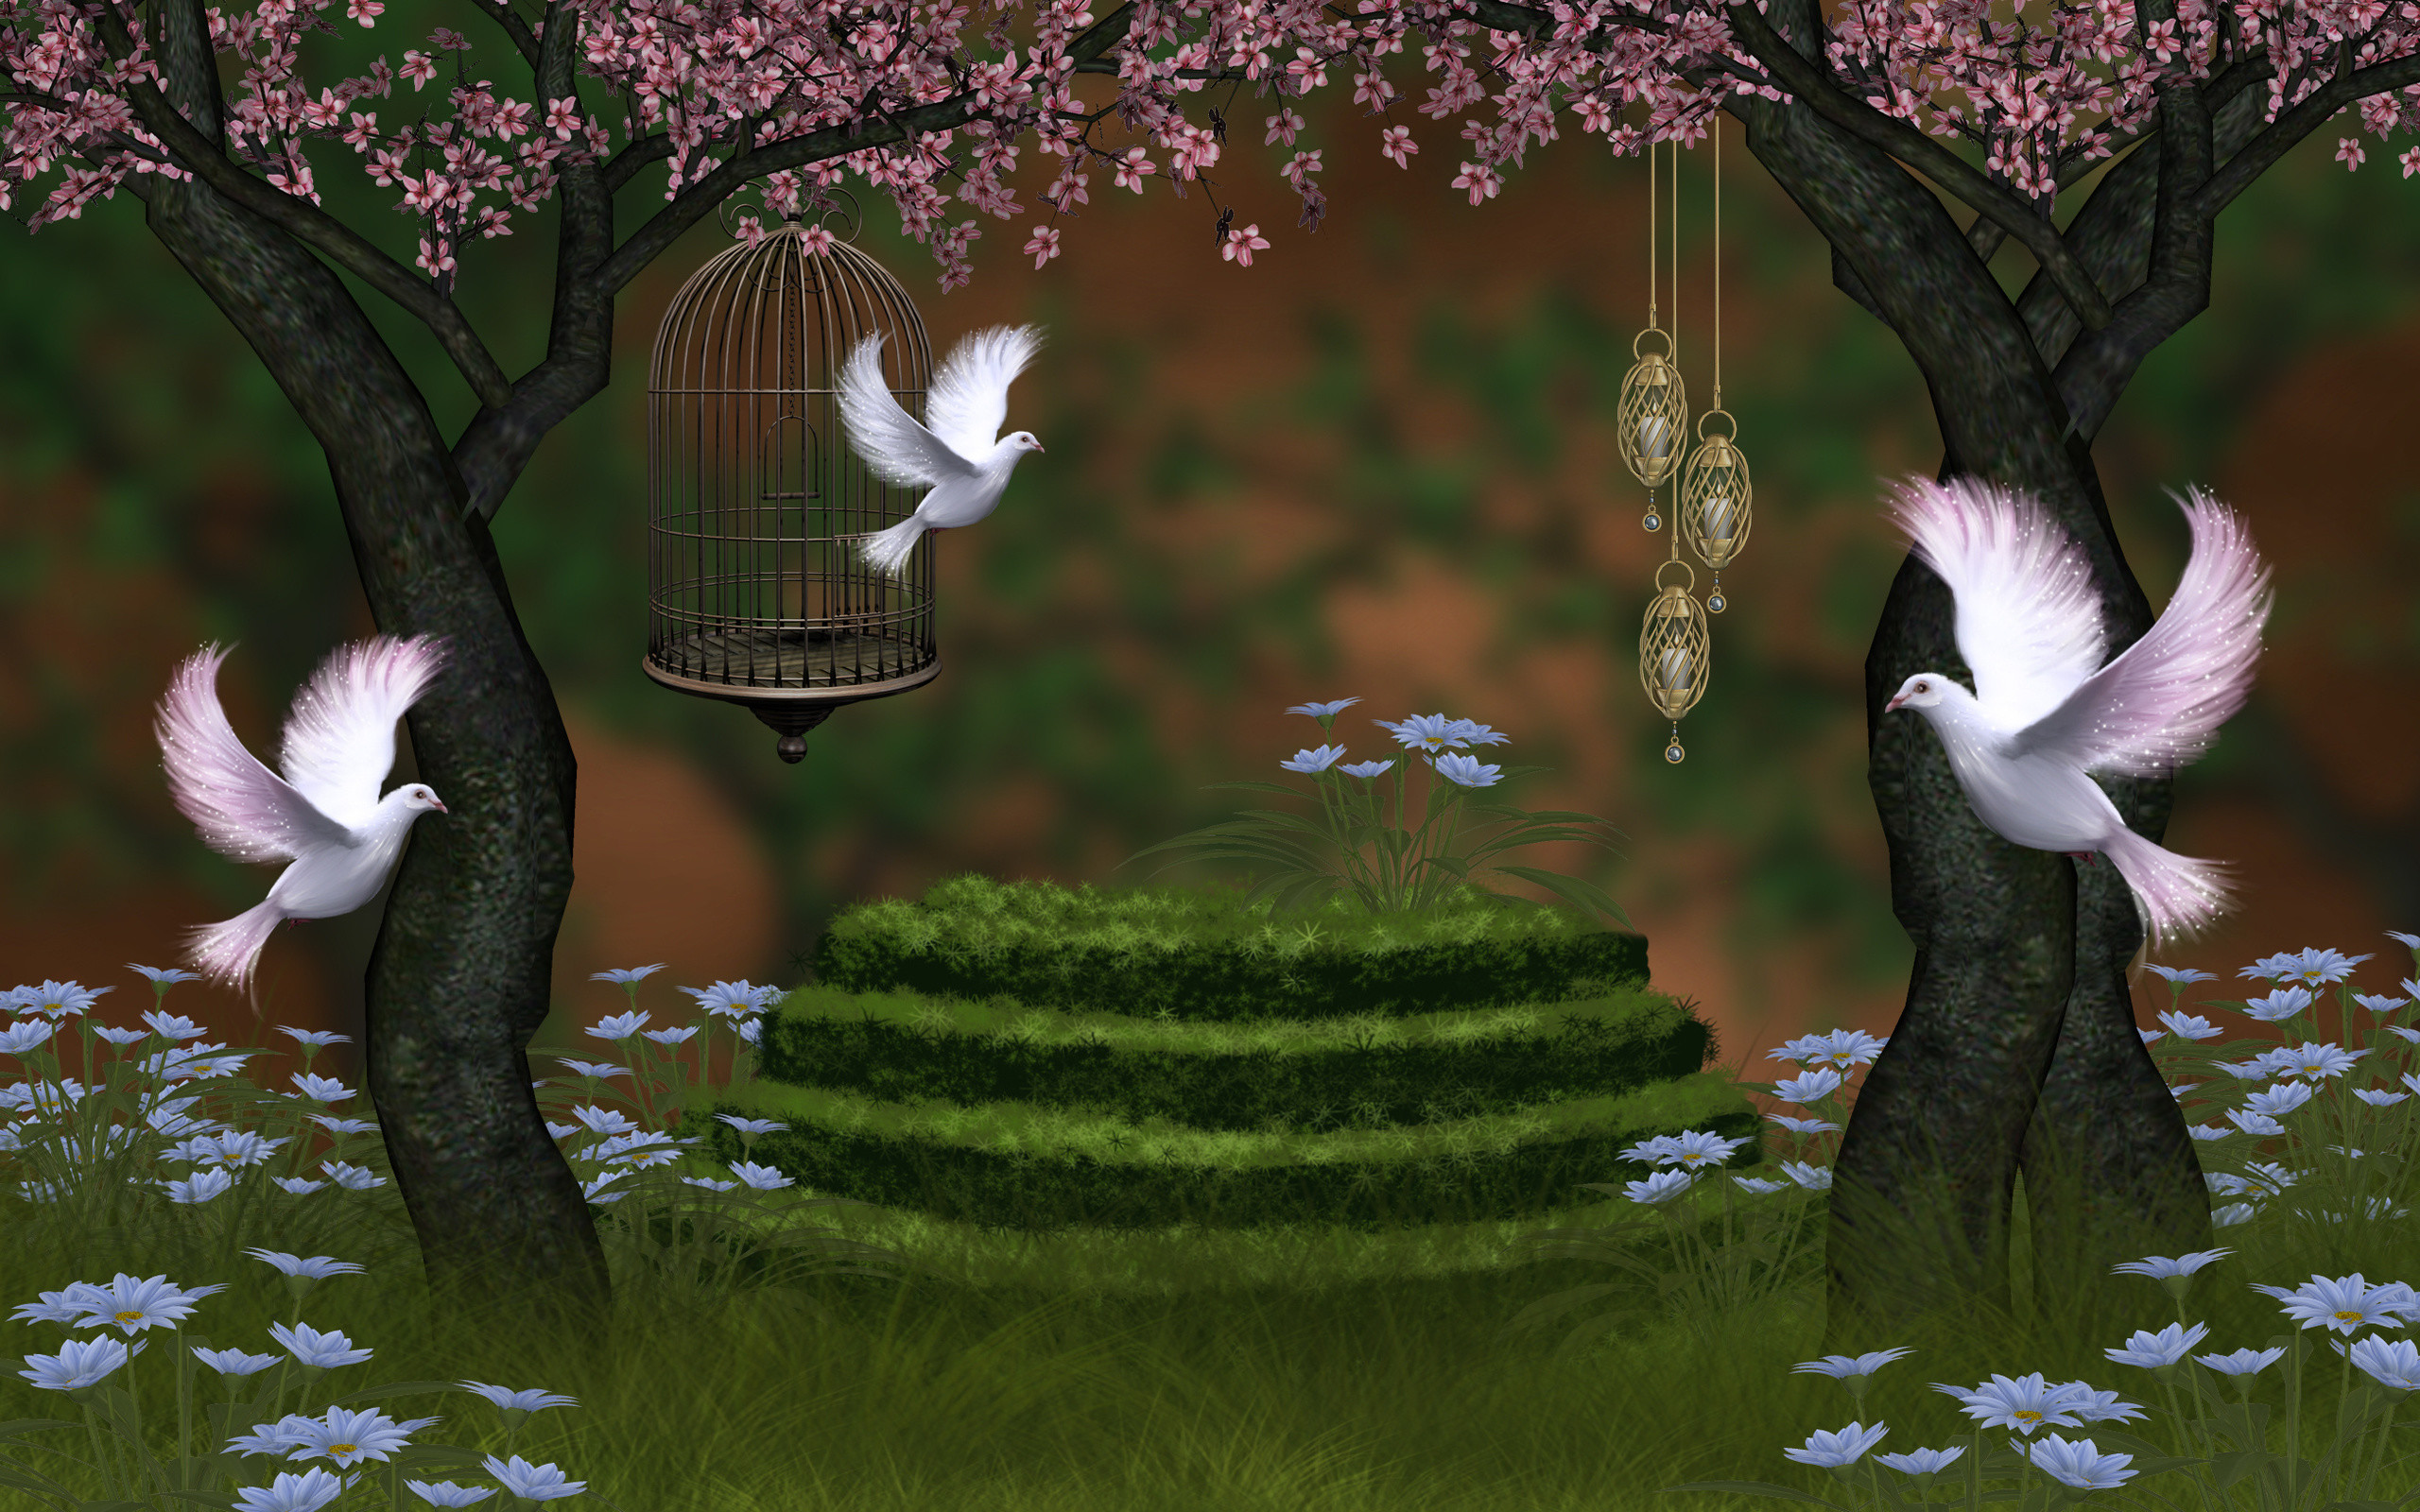 2560x1600 Beautiful Nature Wallpaper for Desktop in 3d with Pigeons and Cherry  Blossoms